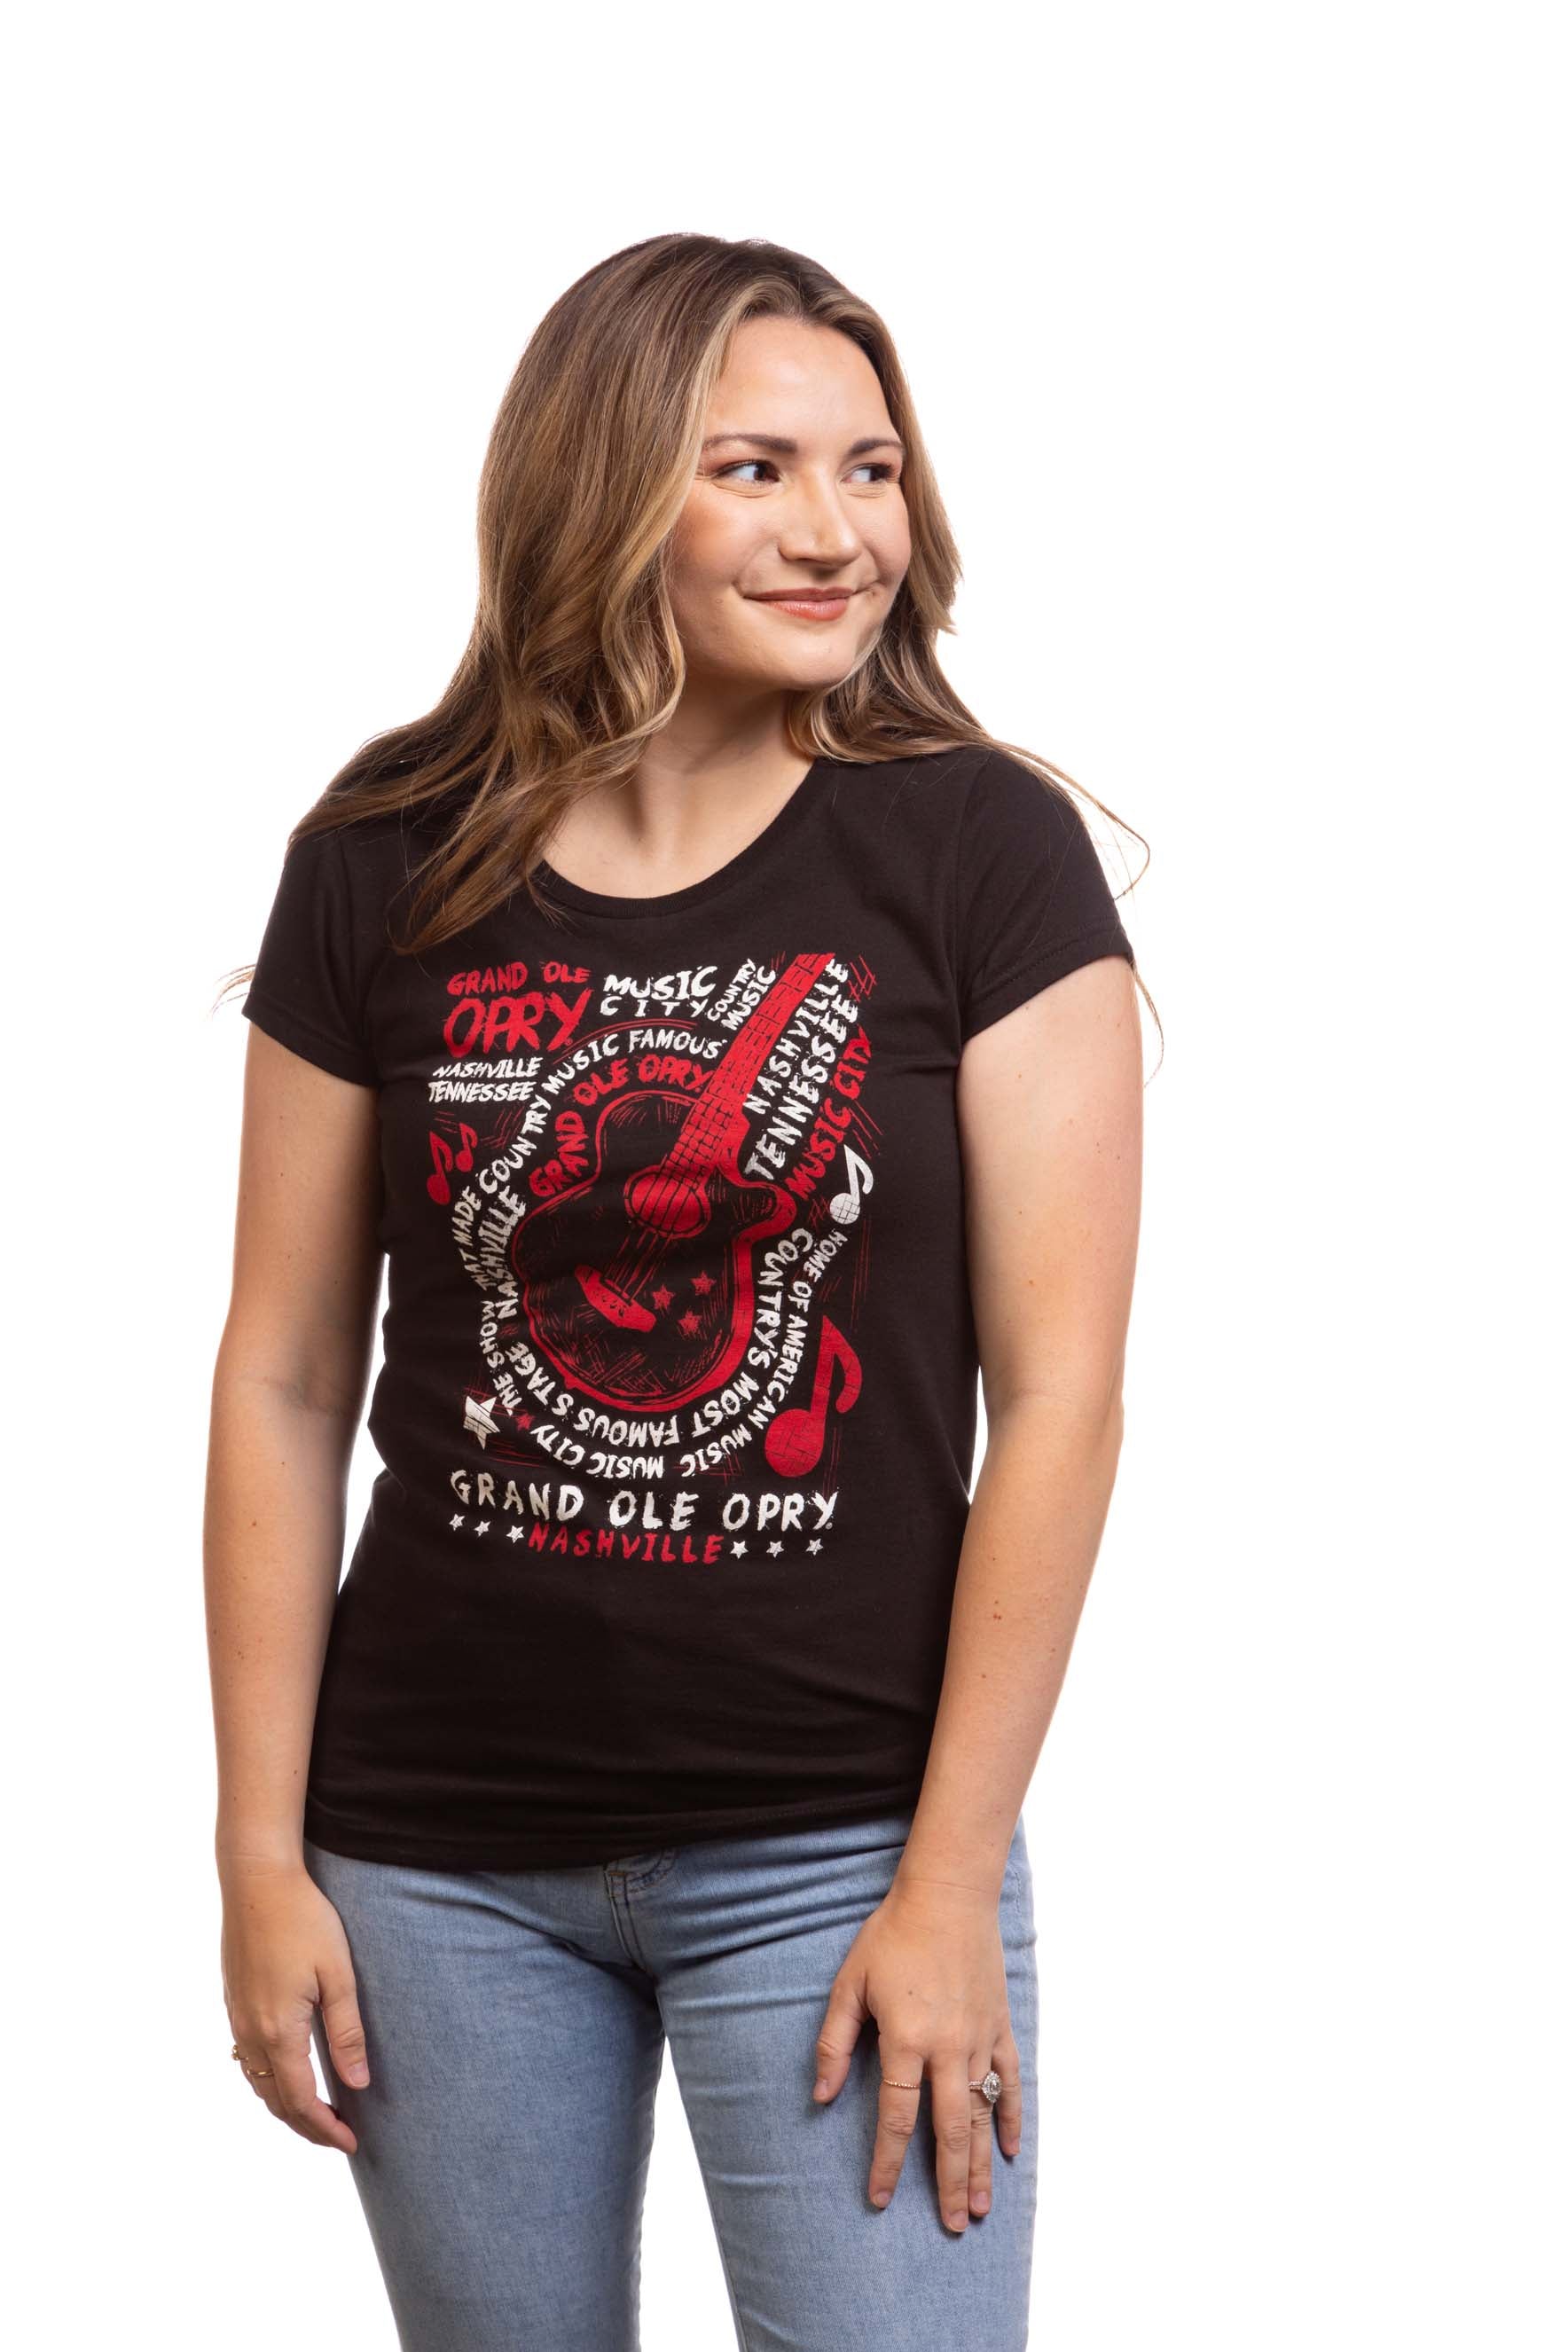 Opry Outlaw Guitar T-Shirt